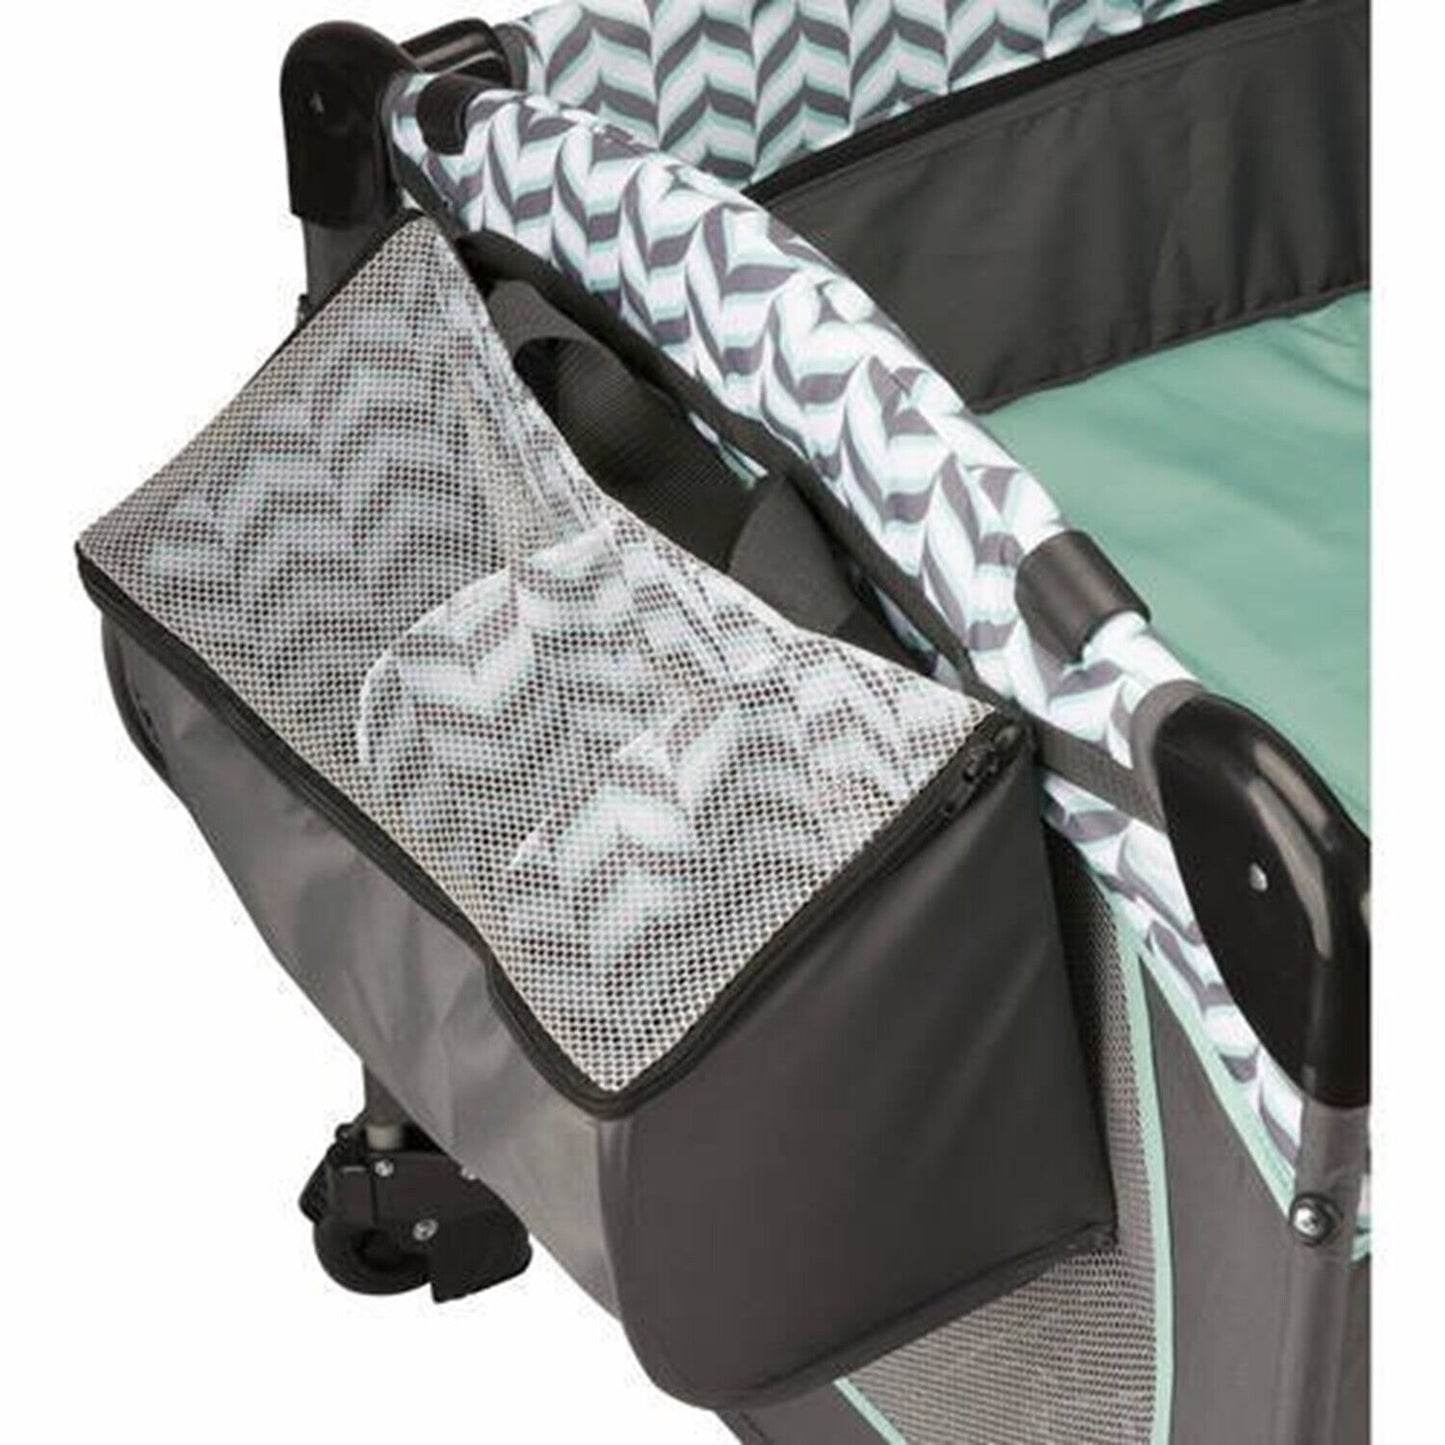 Baby Stroller Travel System with Car Seat Combo High Chair Infant Playard Set